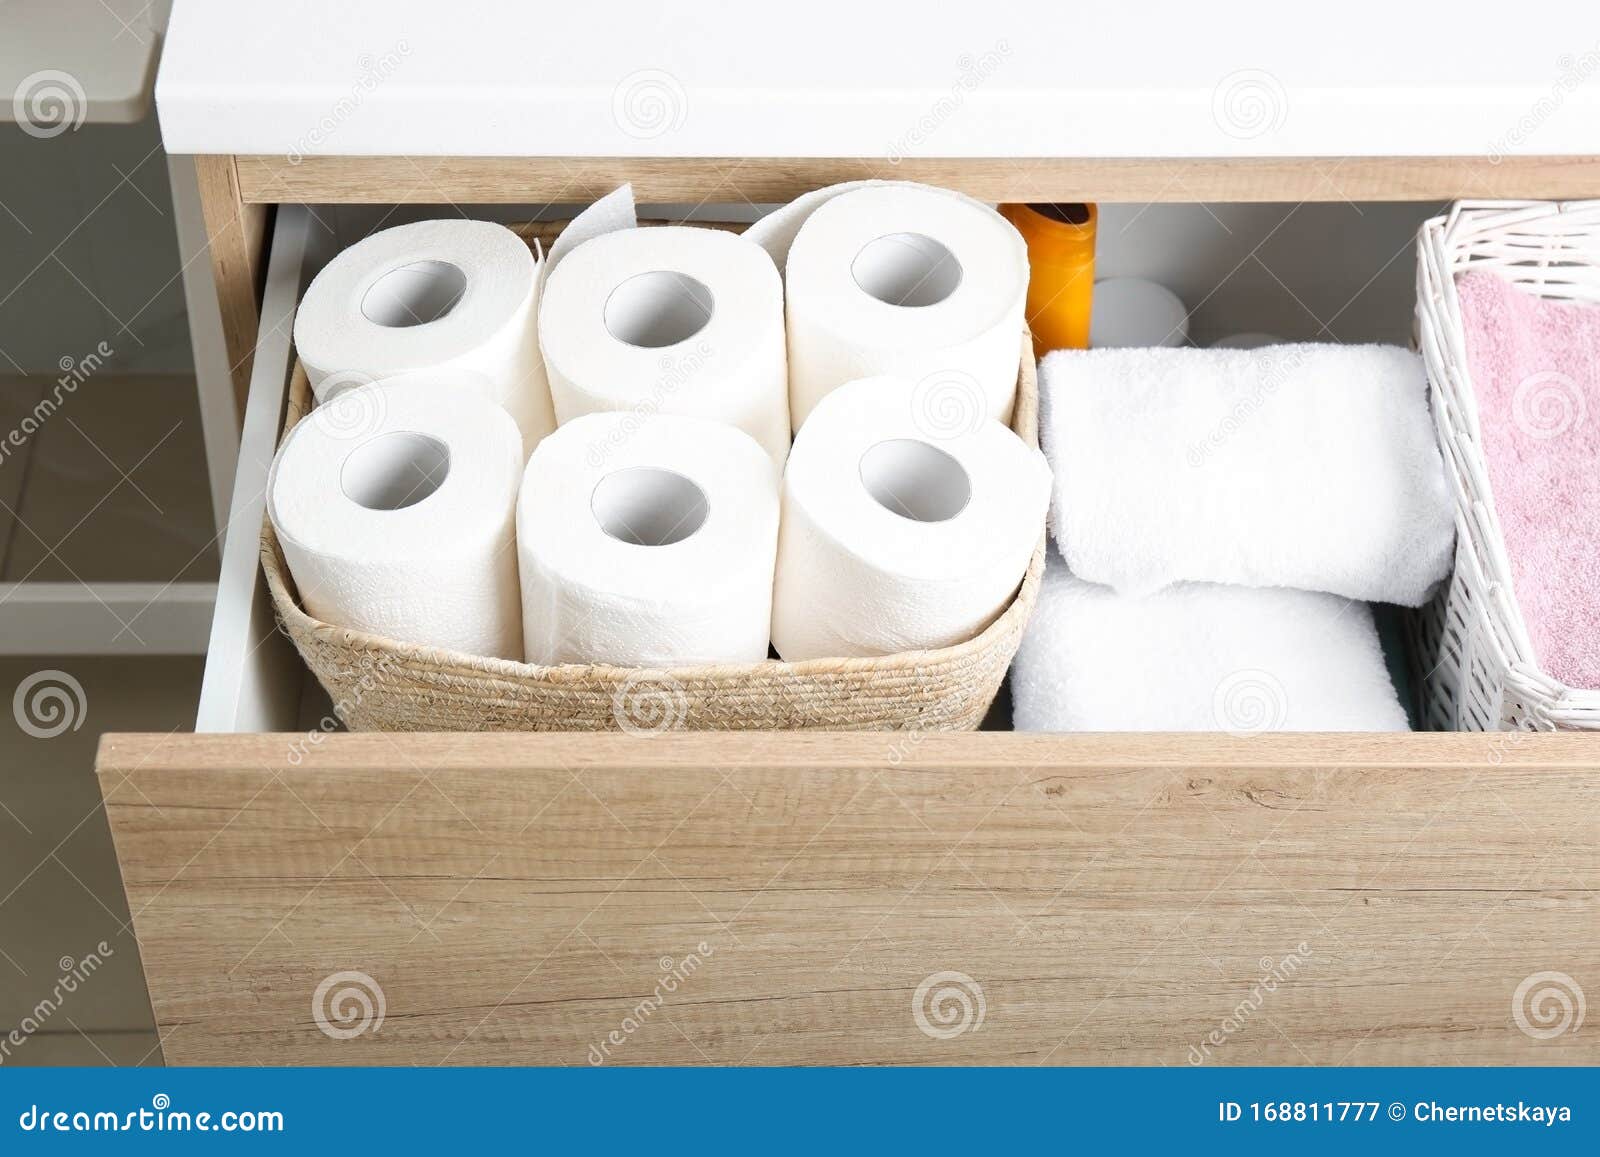 Open Cabinet Drawer With Toilet Paper Rolls Stock Image Image Of